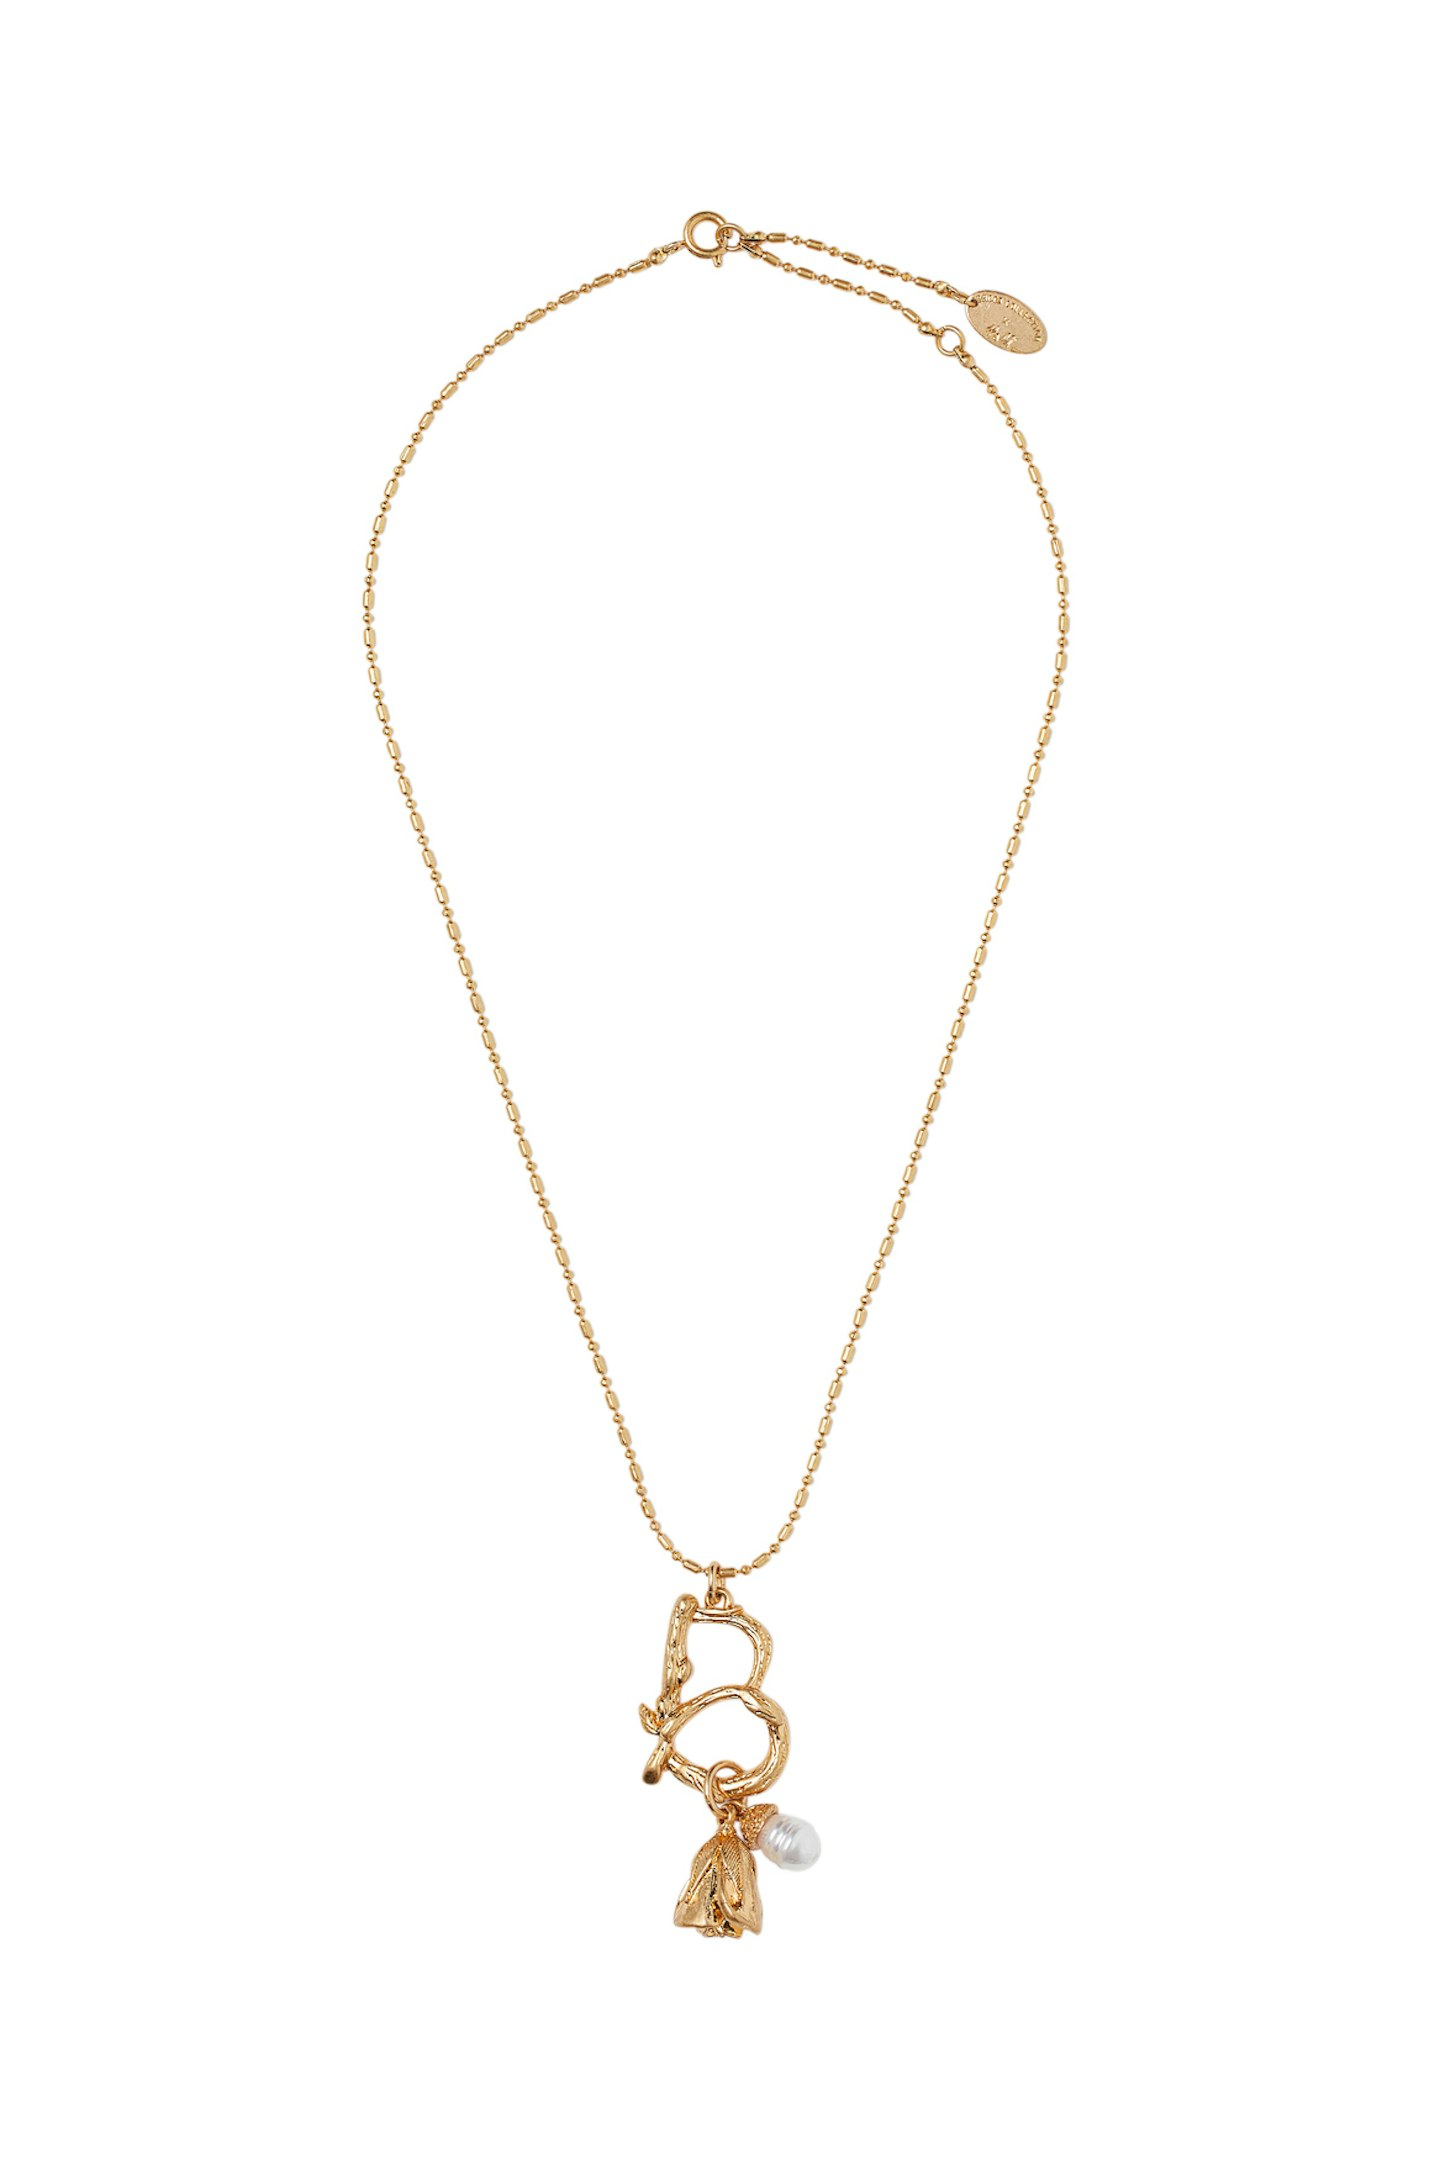 B Necklace, £9.99